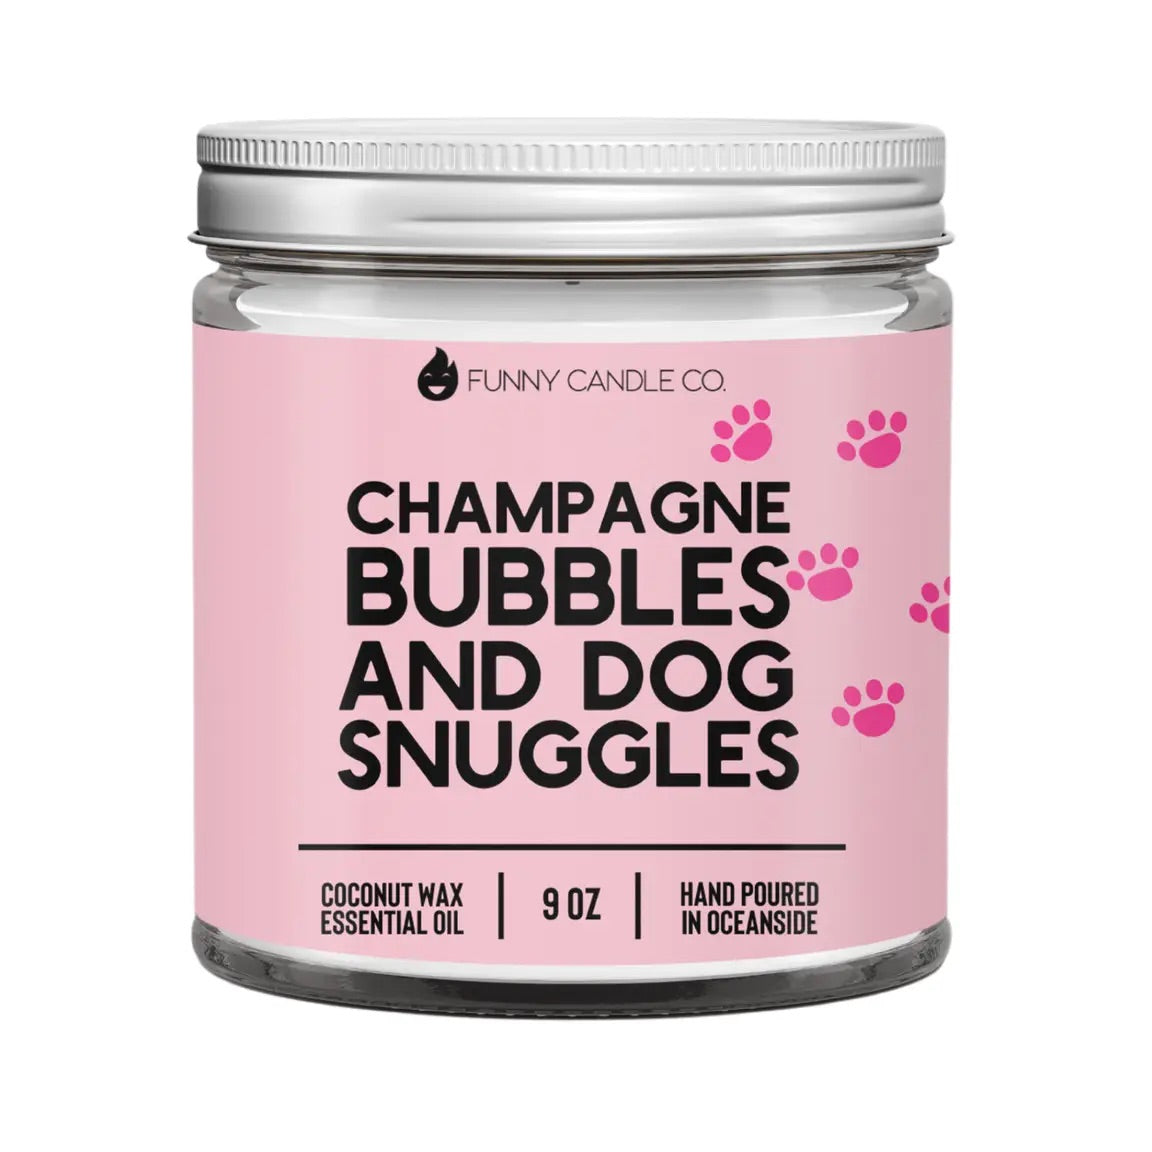 Funny Candle Co.- 
Champagne Bubbles and Dog Snuggles Candle